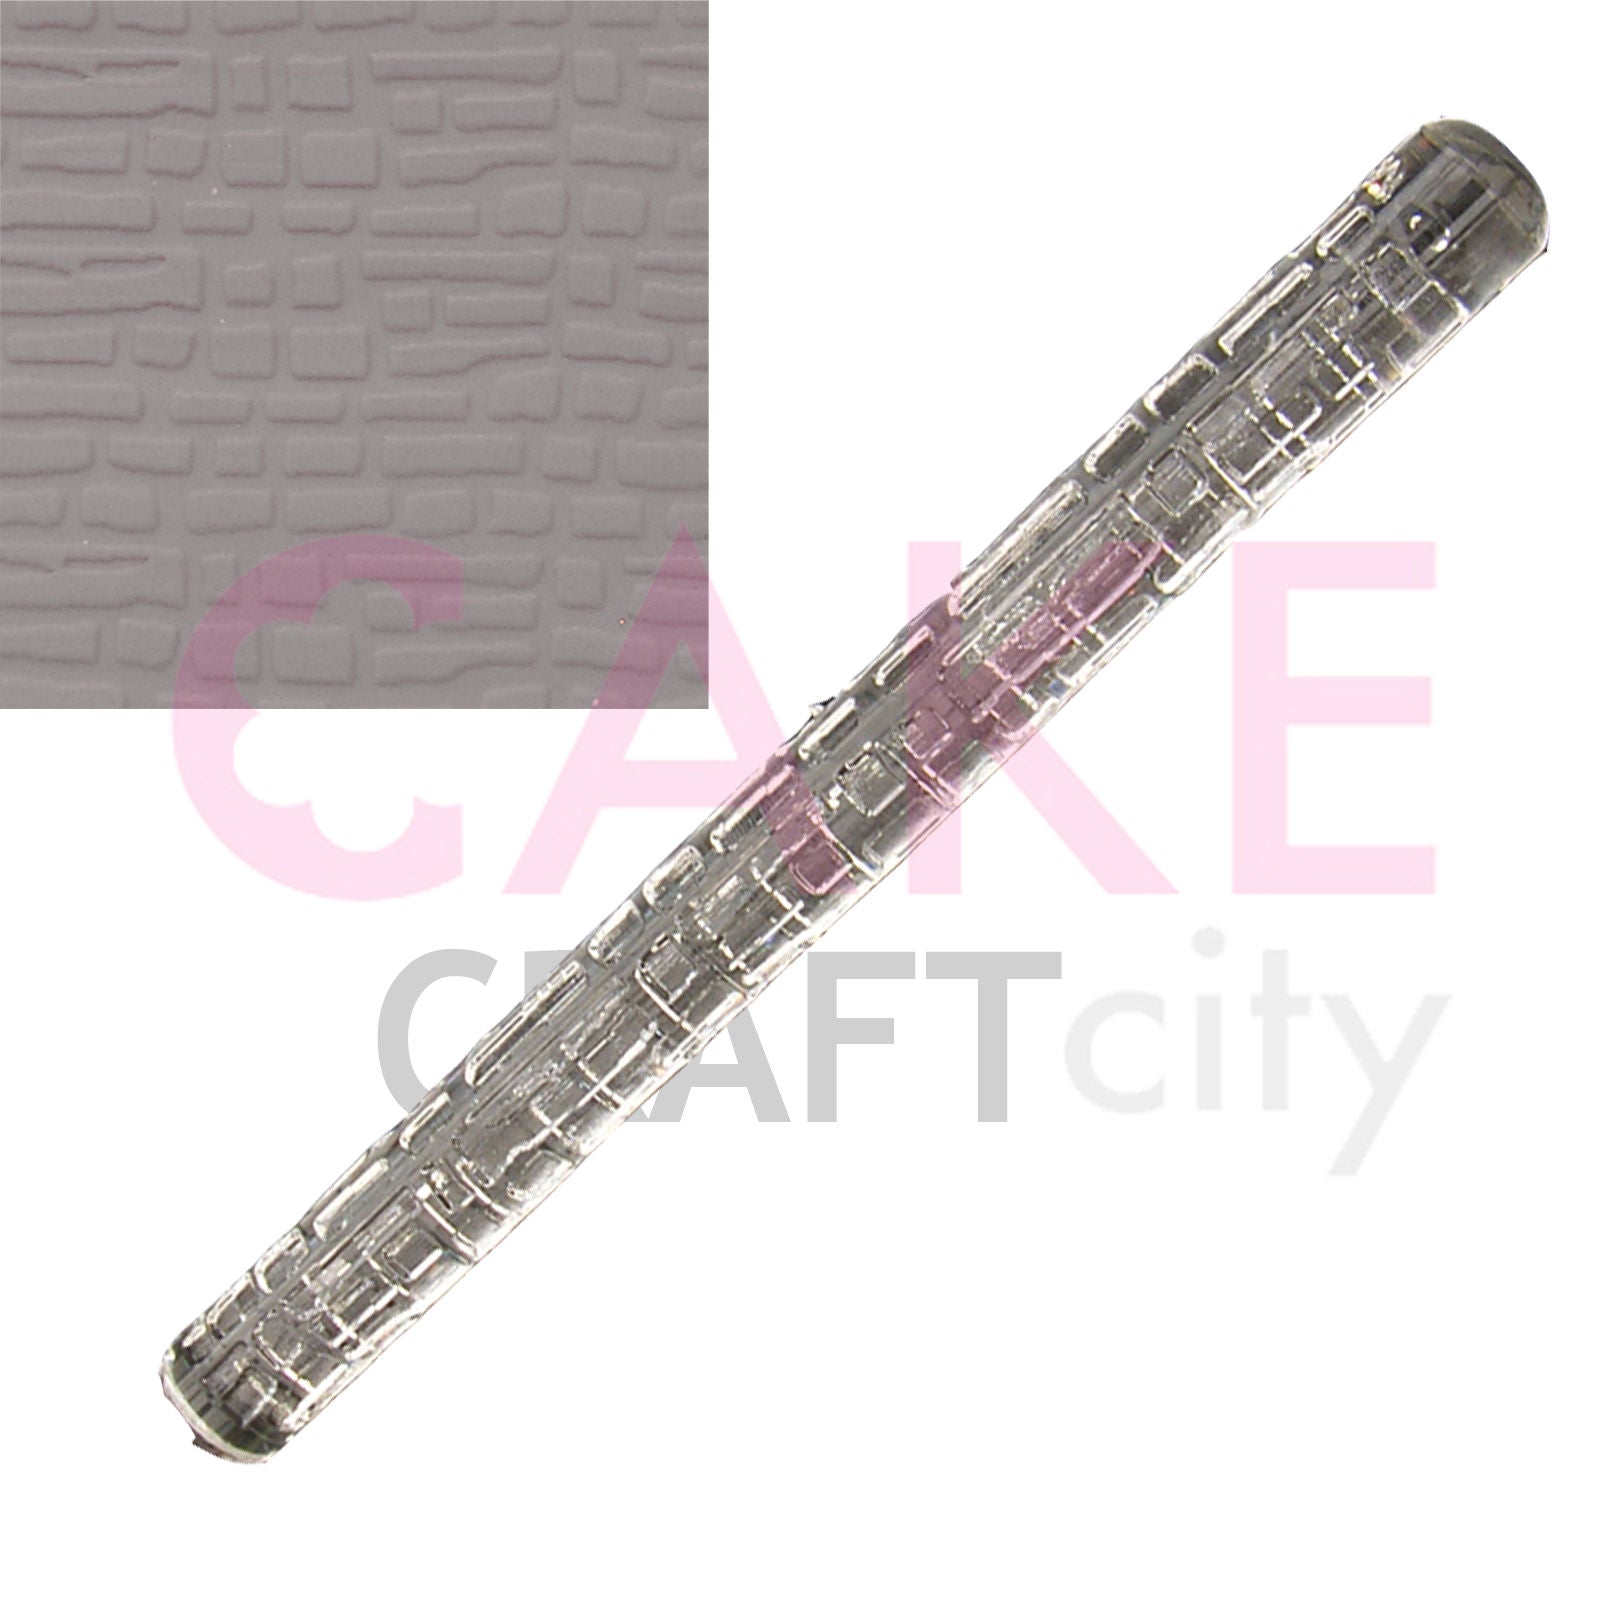 Large Dry Stone Wall - Castle effect Texture Embossing Rolling Pin Cake icing